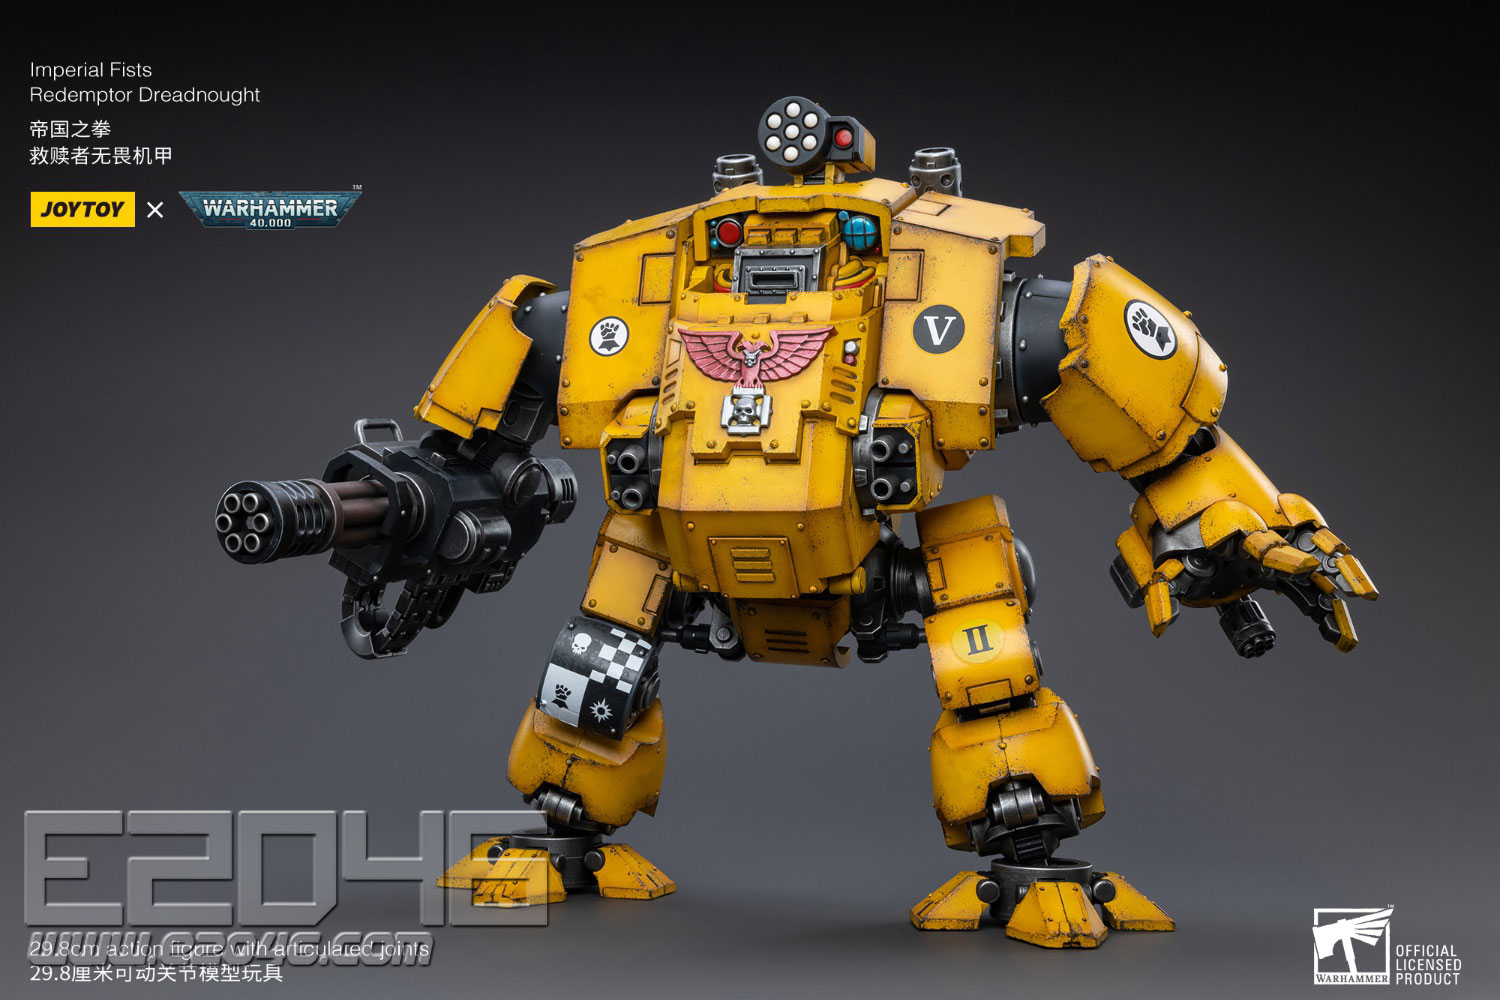 Imperial Fists Redemptor Dreadnought (DOLL)